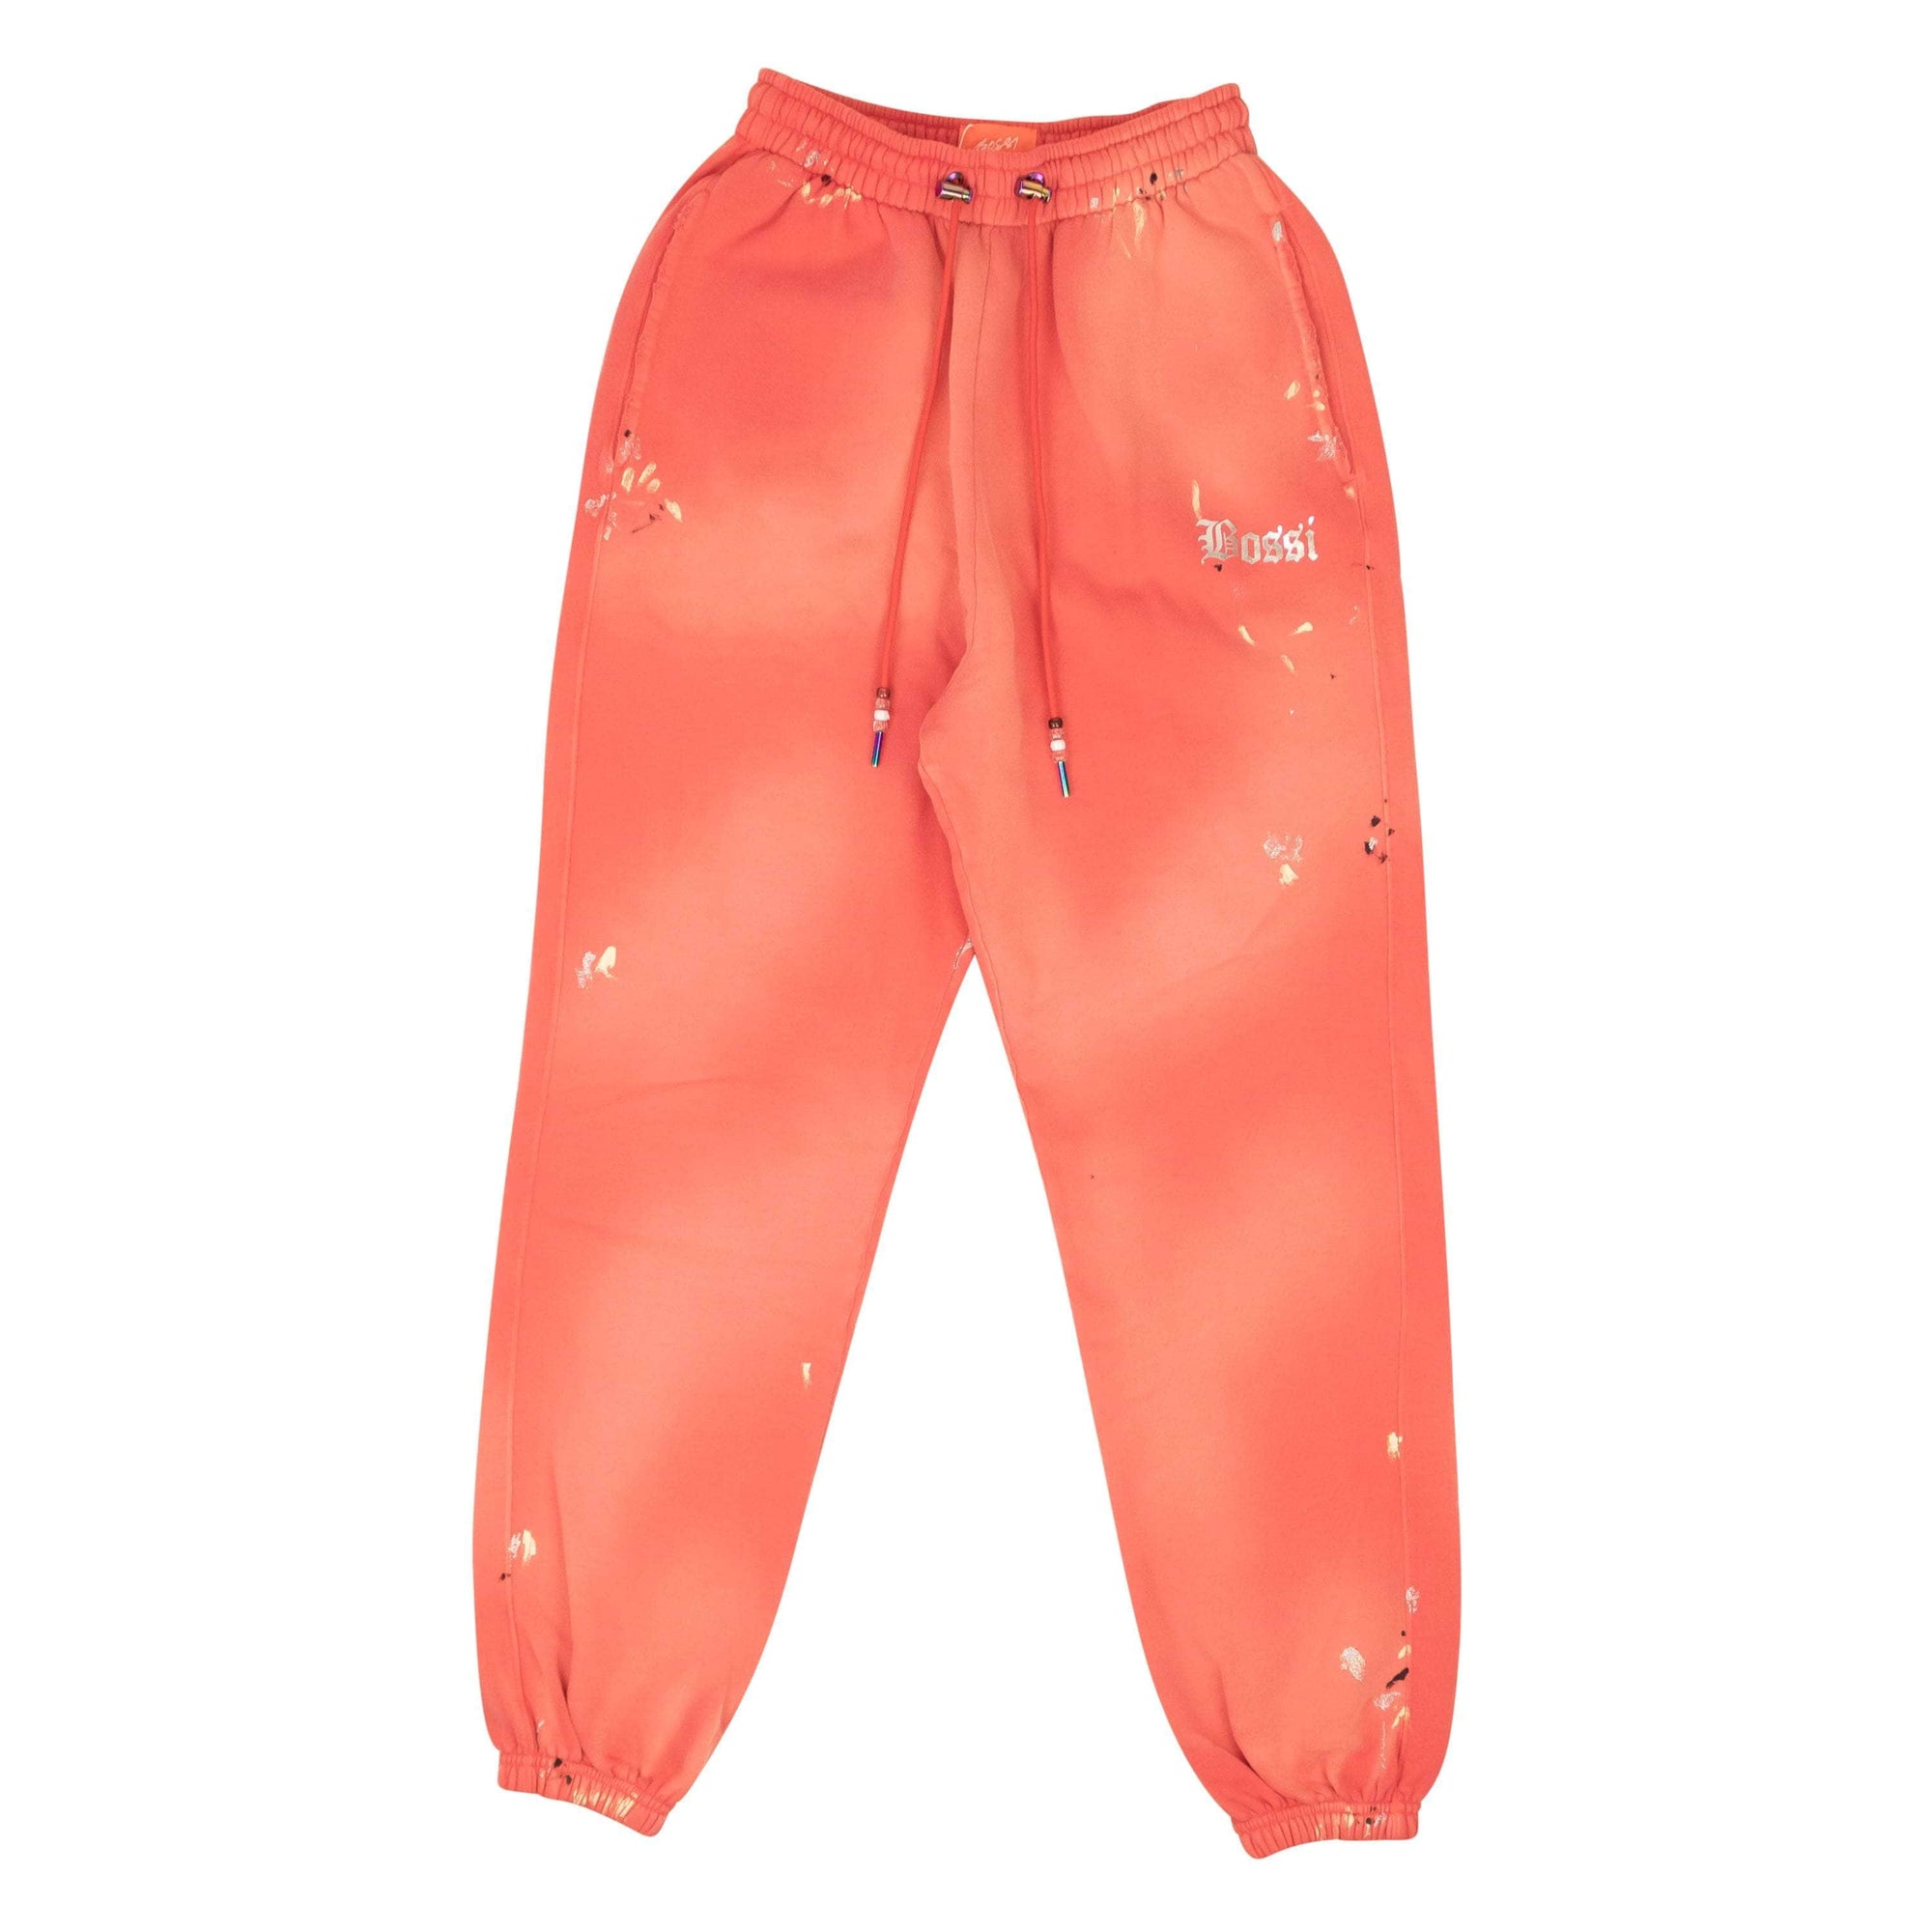 Bossi bossi, channelenable-all, chicmi, couponcollection, gender-mens, main-clothing, mens-joggers-sweatpants, mens-shoes, size-s, under-250 S Red Cotton Crest Paint Design Sweatpants BOS-XBTM-0007/S BOS-XBTM-0007/S